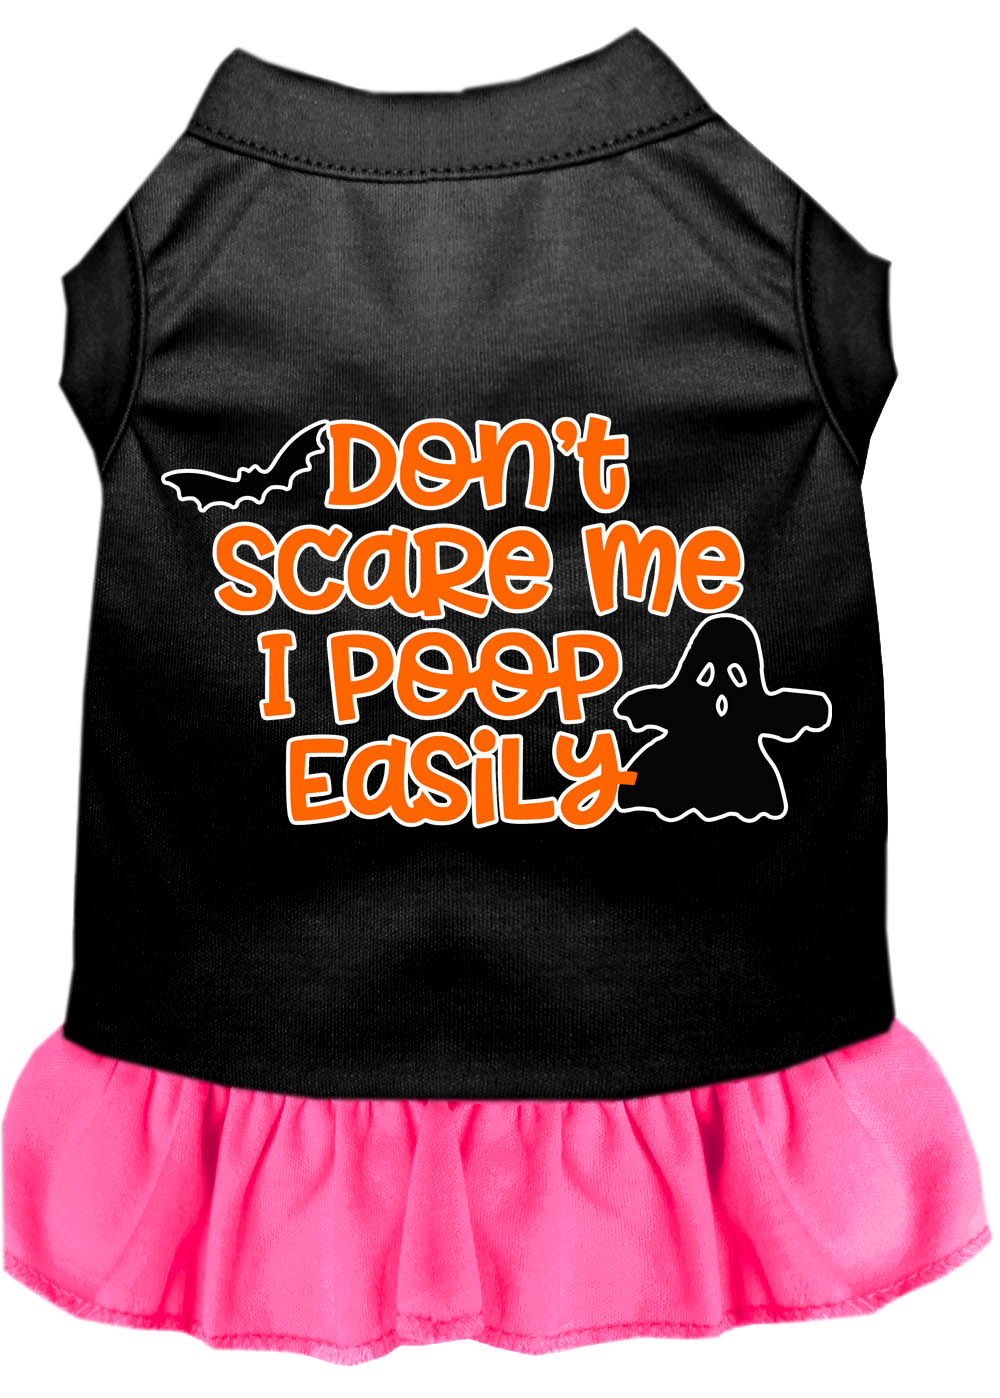 Don't Scare Me, Poops Easily Screen Print Dog Dress Black with Bright Pink XL